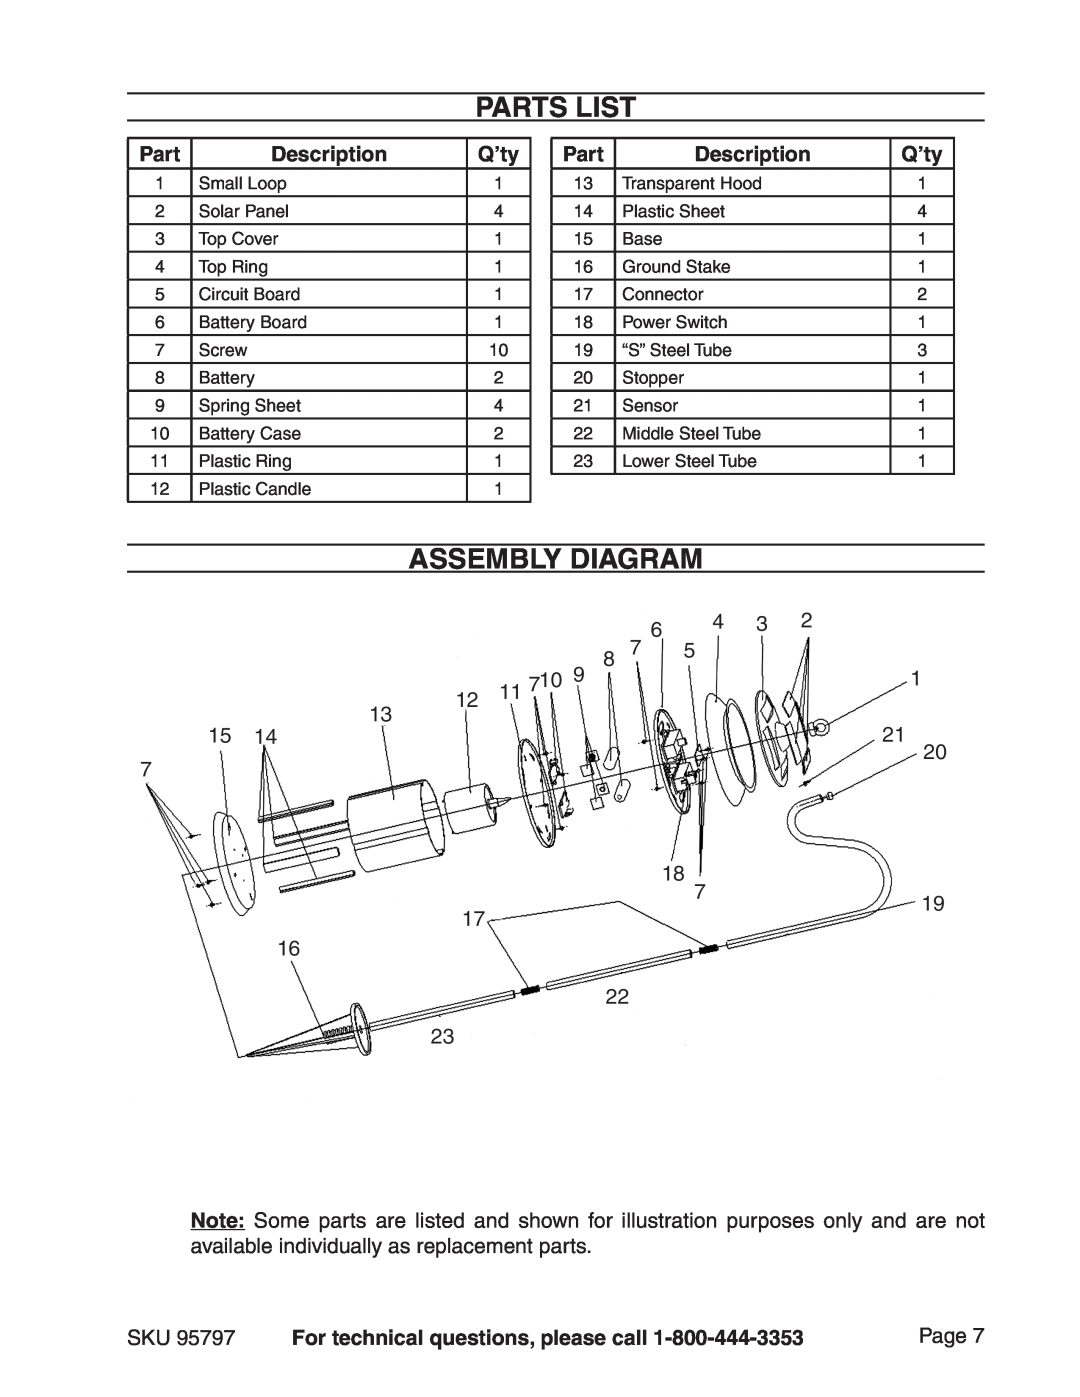 Harbor Freight Tools 95797 manual Parts List, Assembly Diagram, Description, Q’ty, For technical questions, please call 